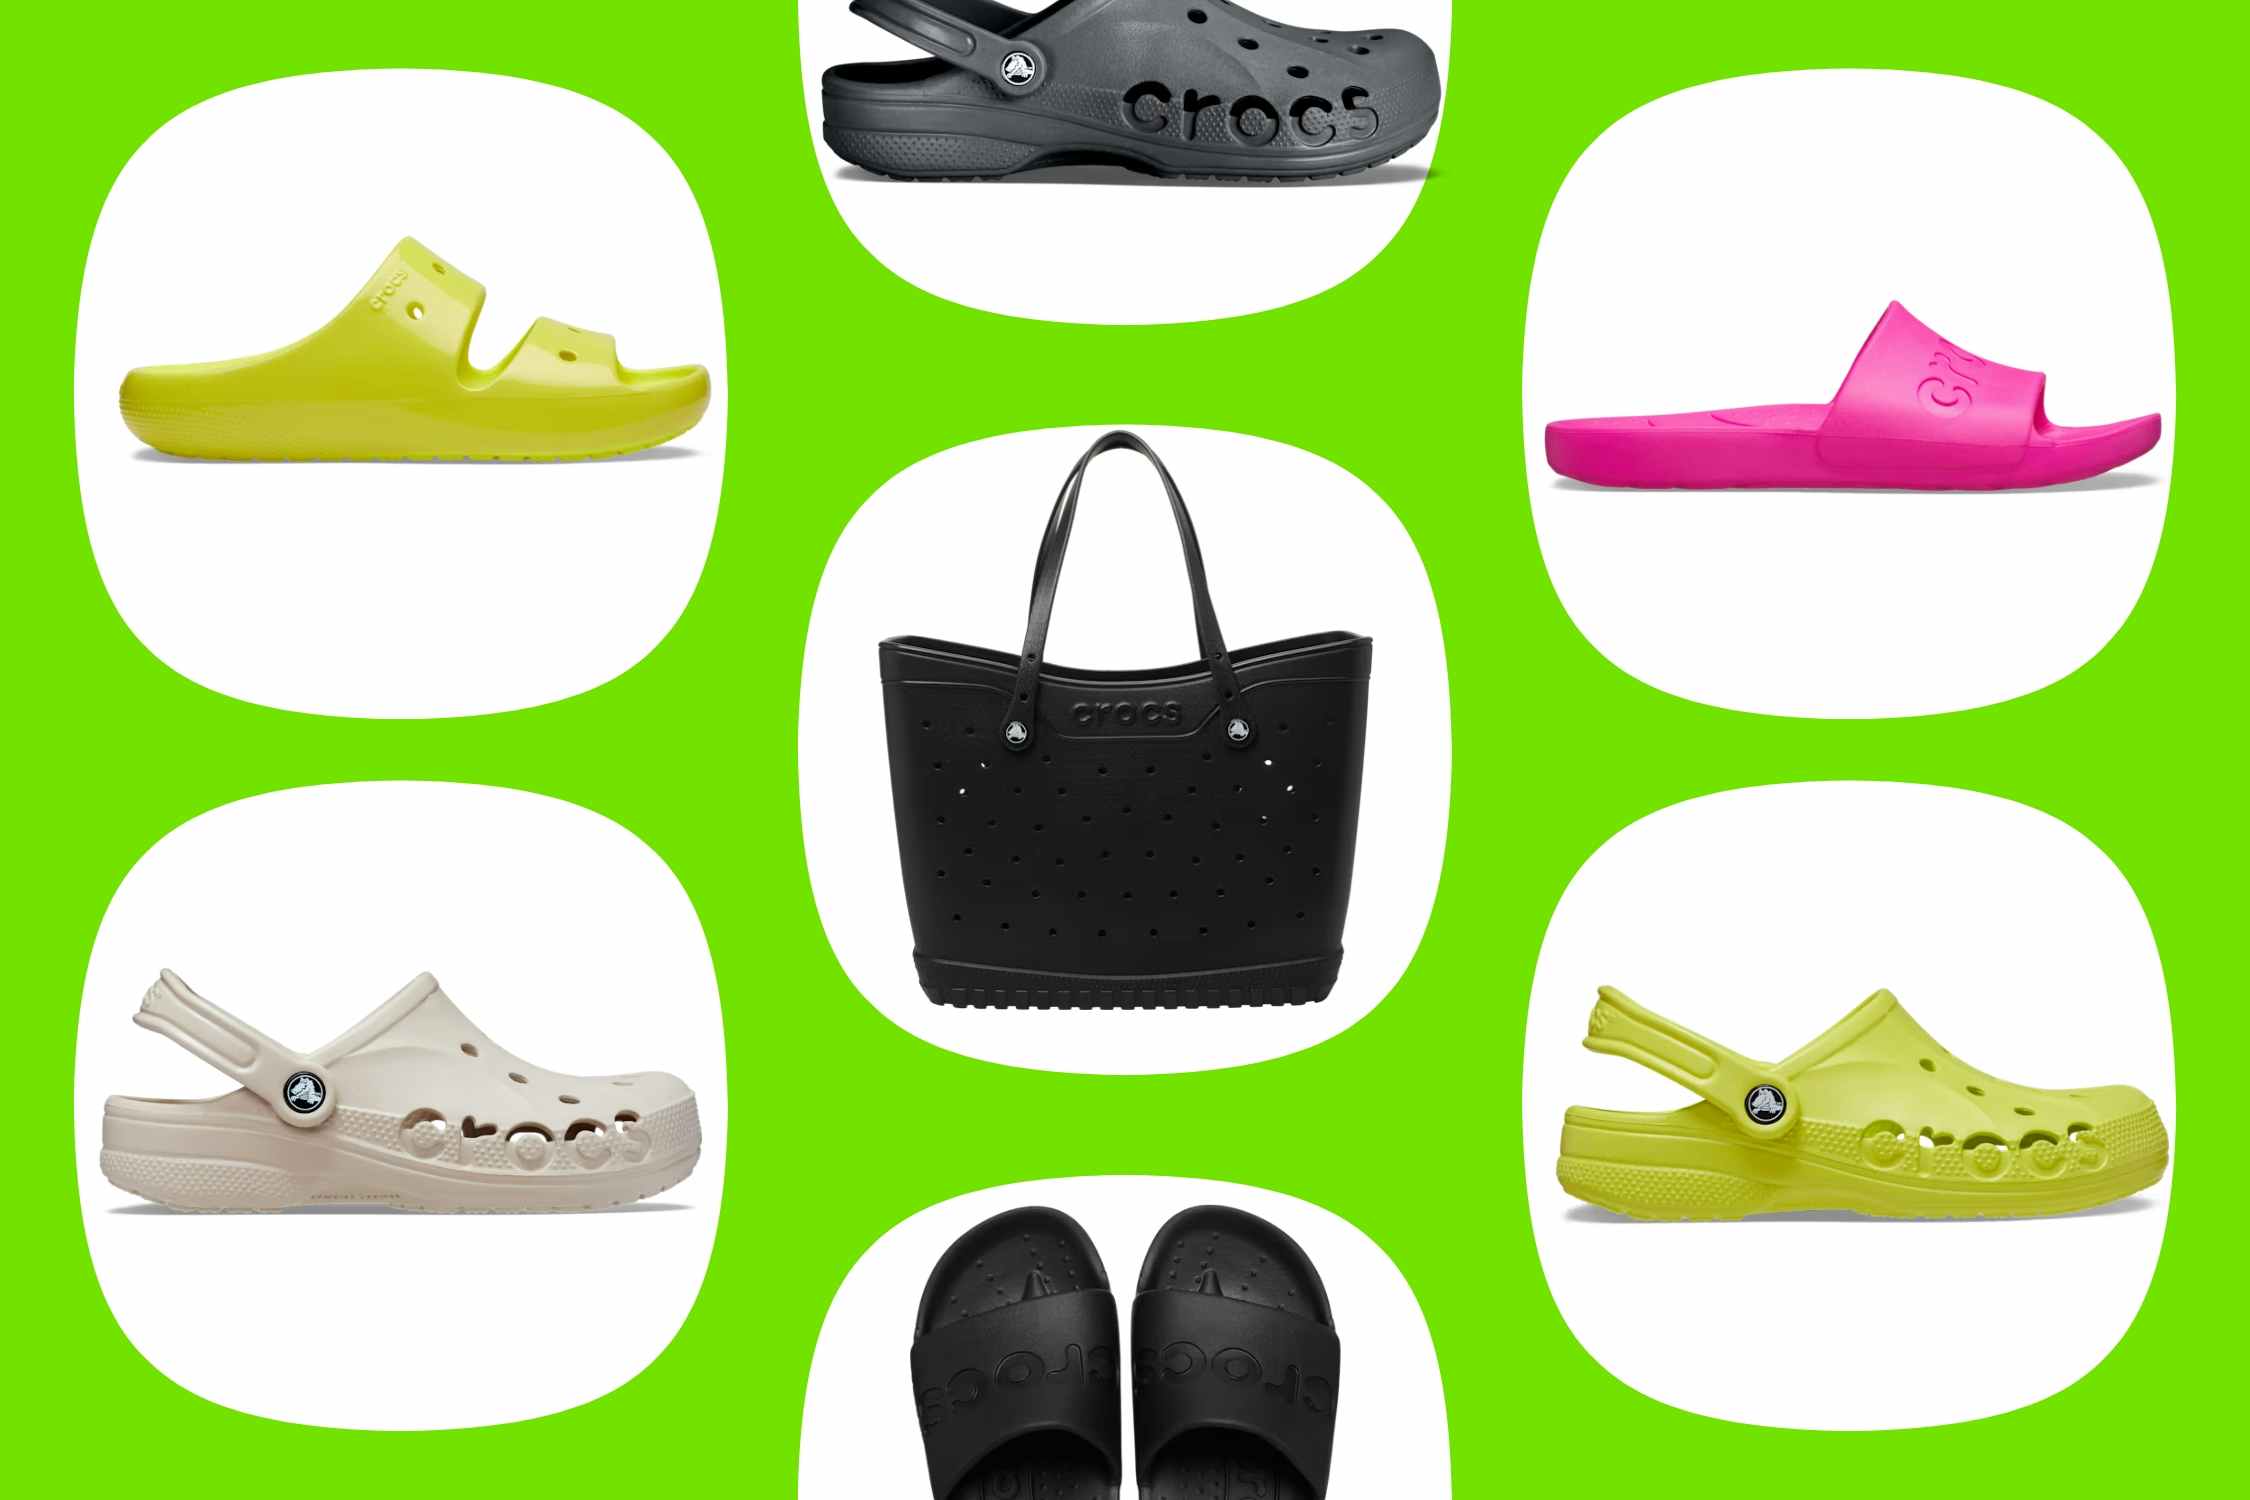 New Lower Prices at Crocs: $15 Slides, $21 Clogs, $56 Tote, and More